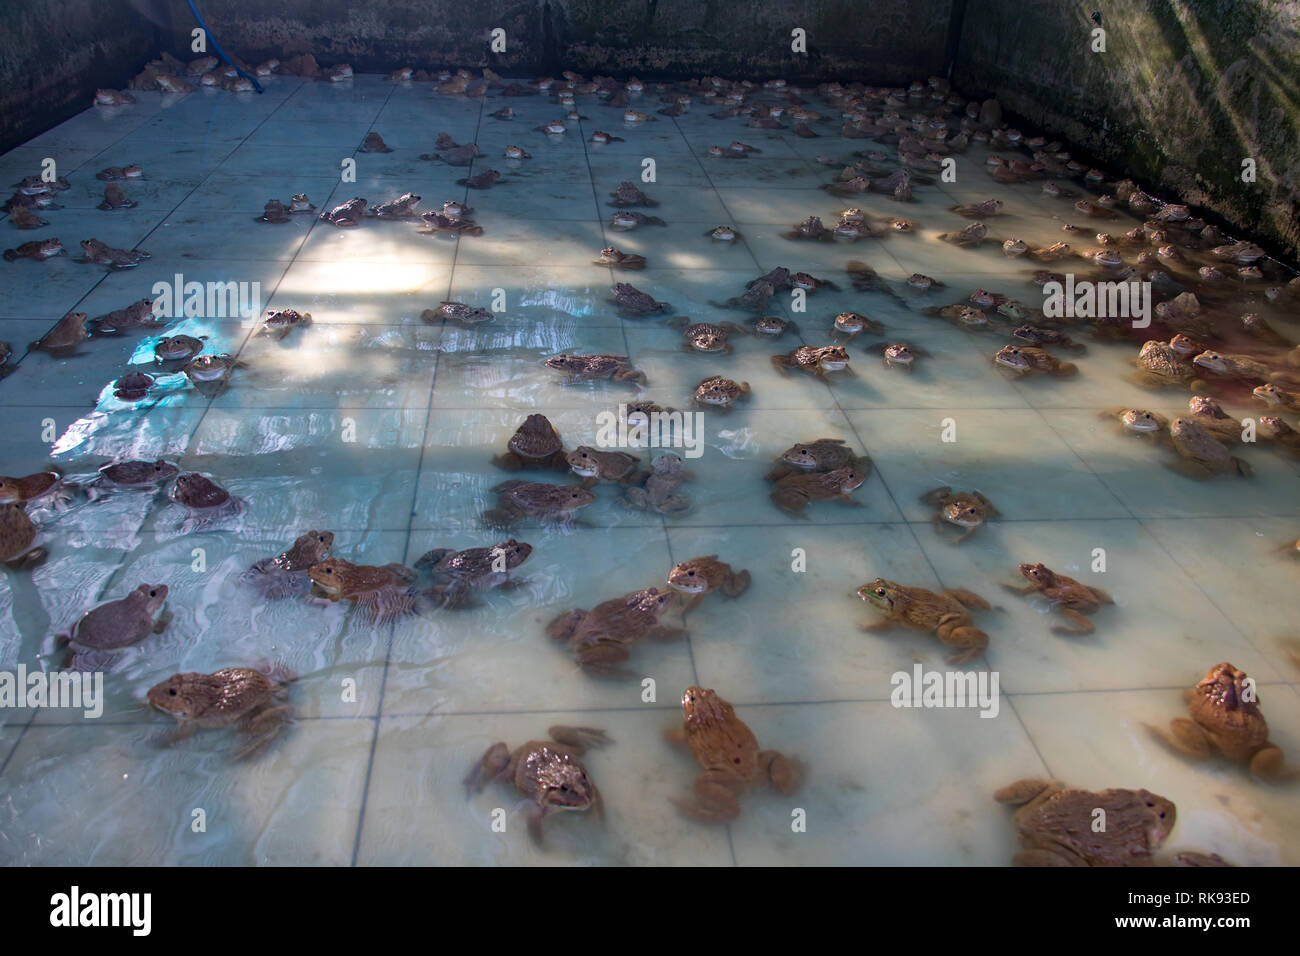 Breeding frogs in water reservoir, Thailand Stock Photo